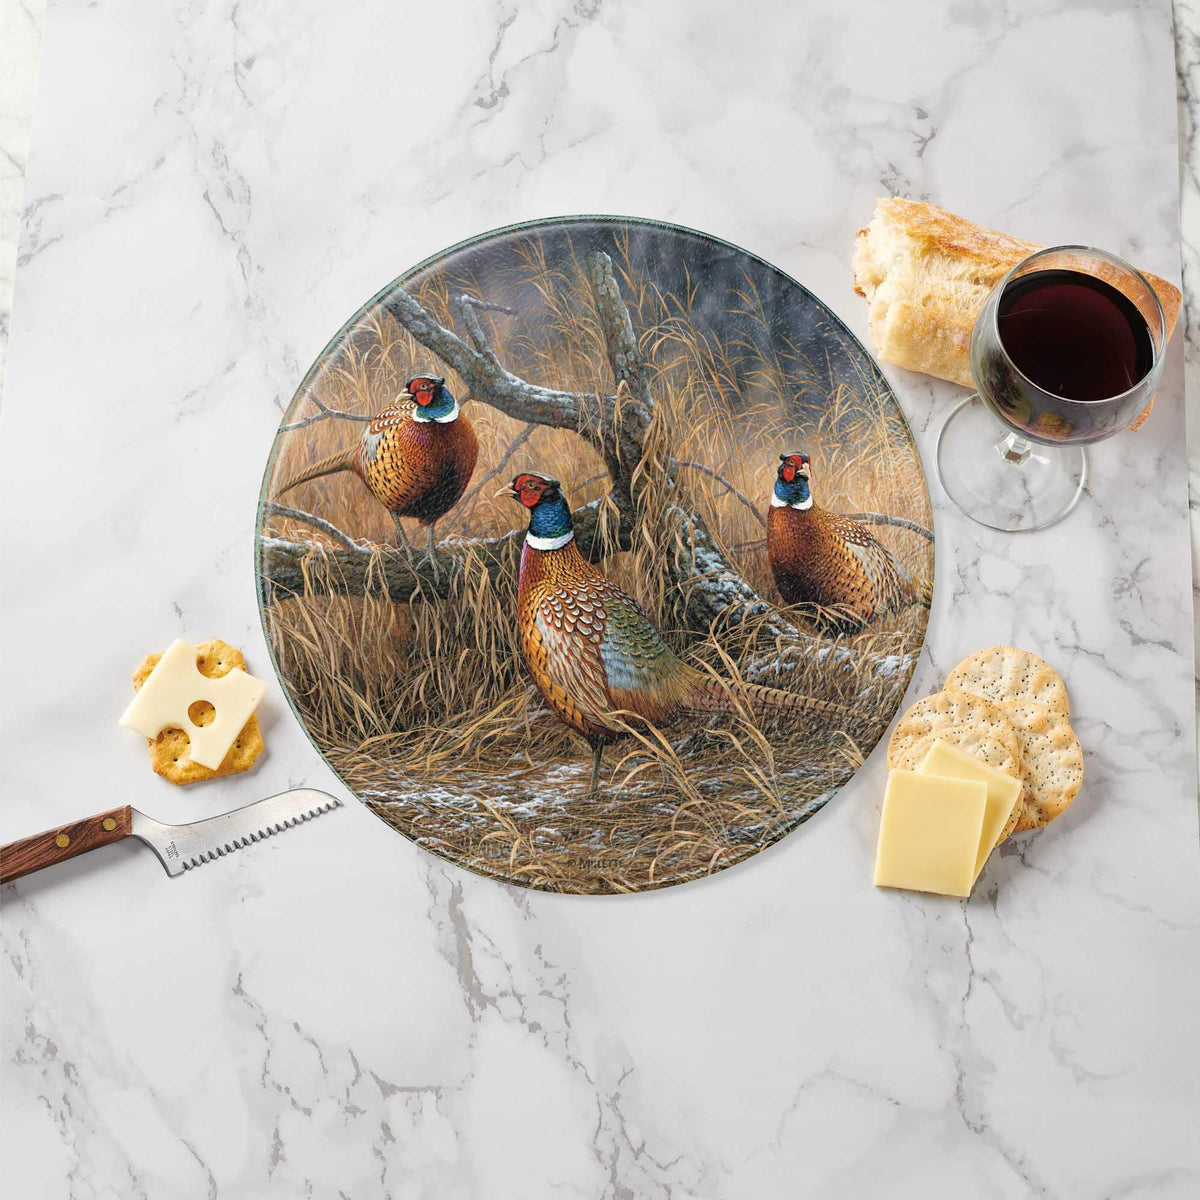 First Dusting—Pheasants Round Cutting Board - Wild Wings